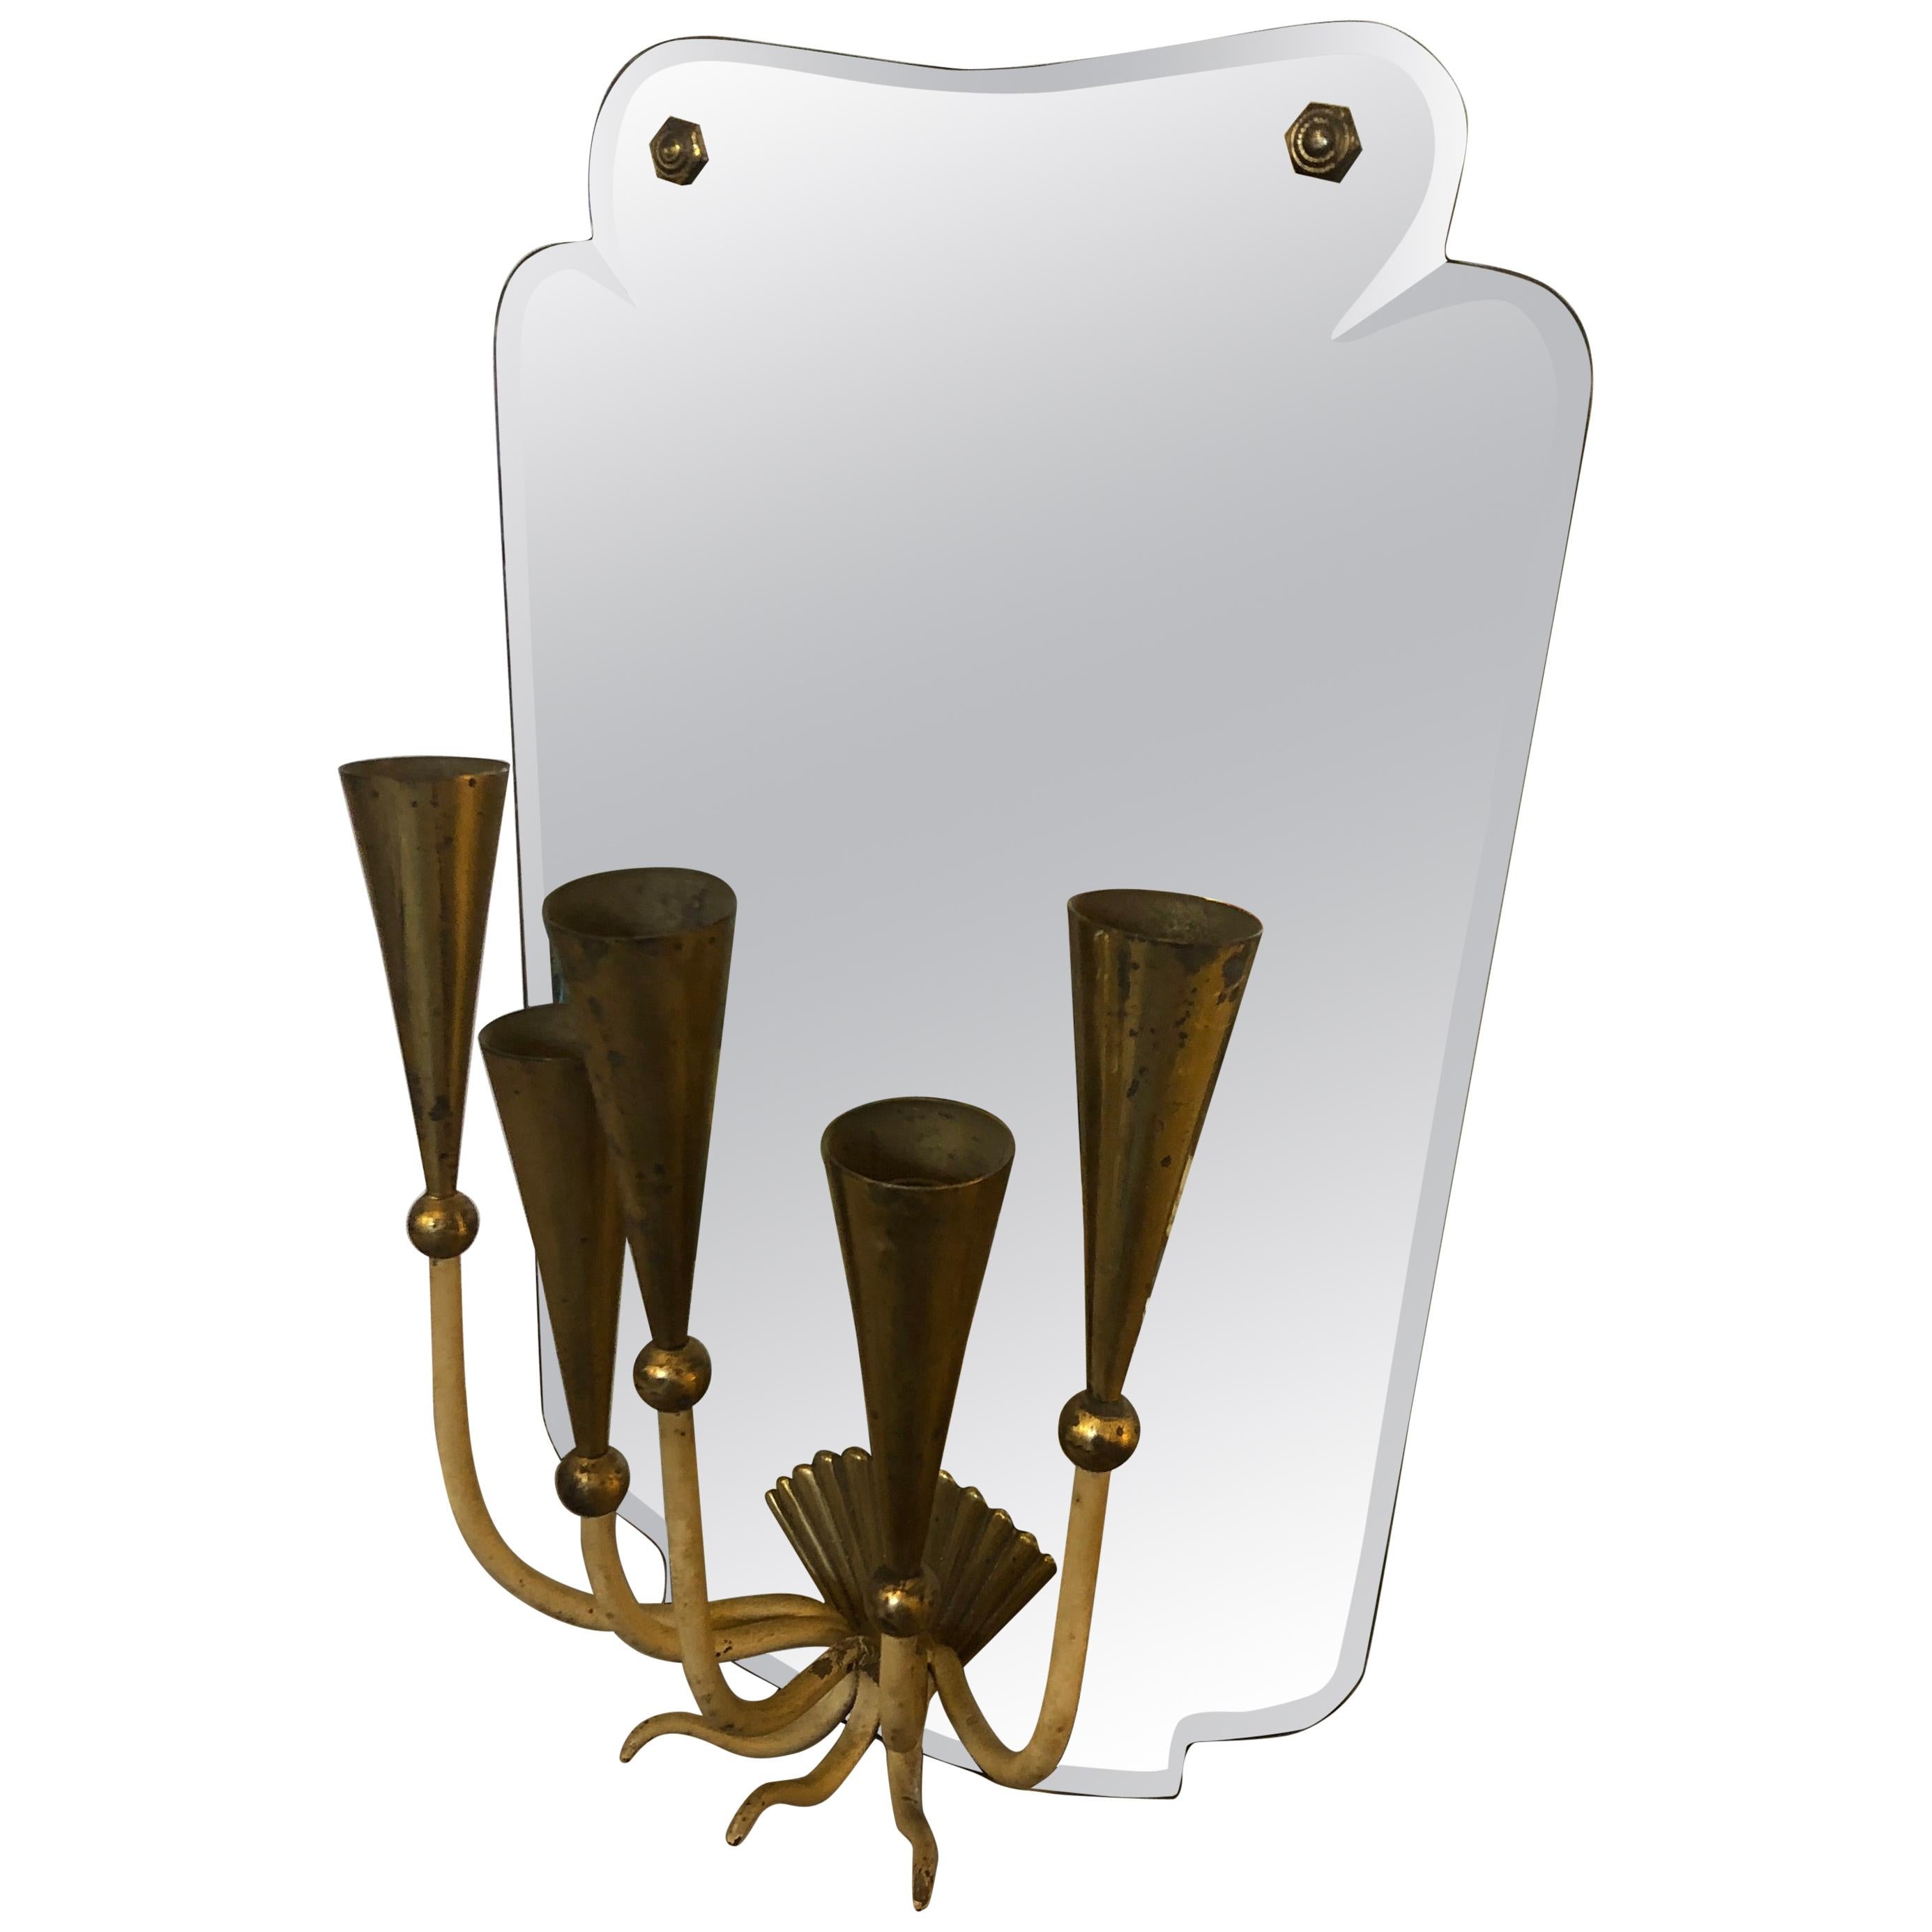 1950s Mid-Century Modern Italian Mirrored Wall Sconce by Cesare Lacca